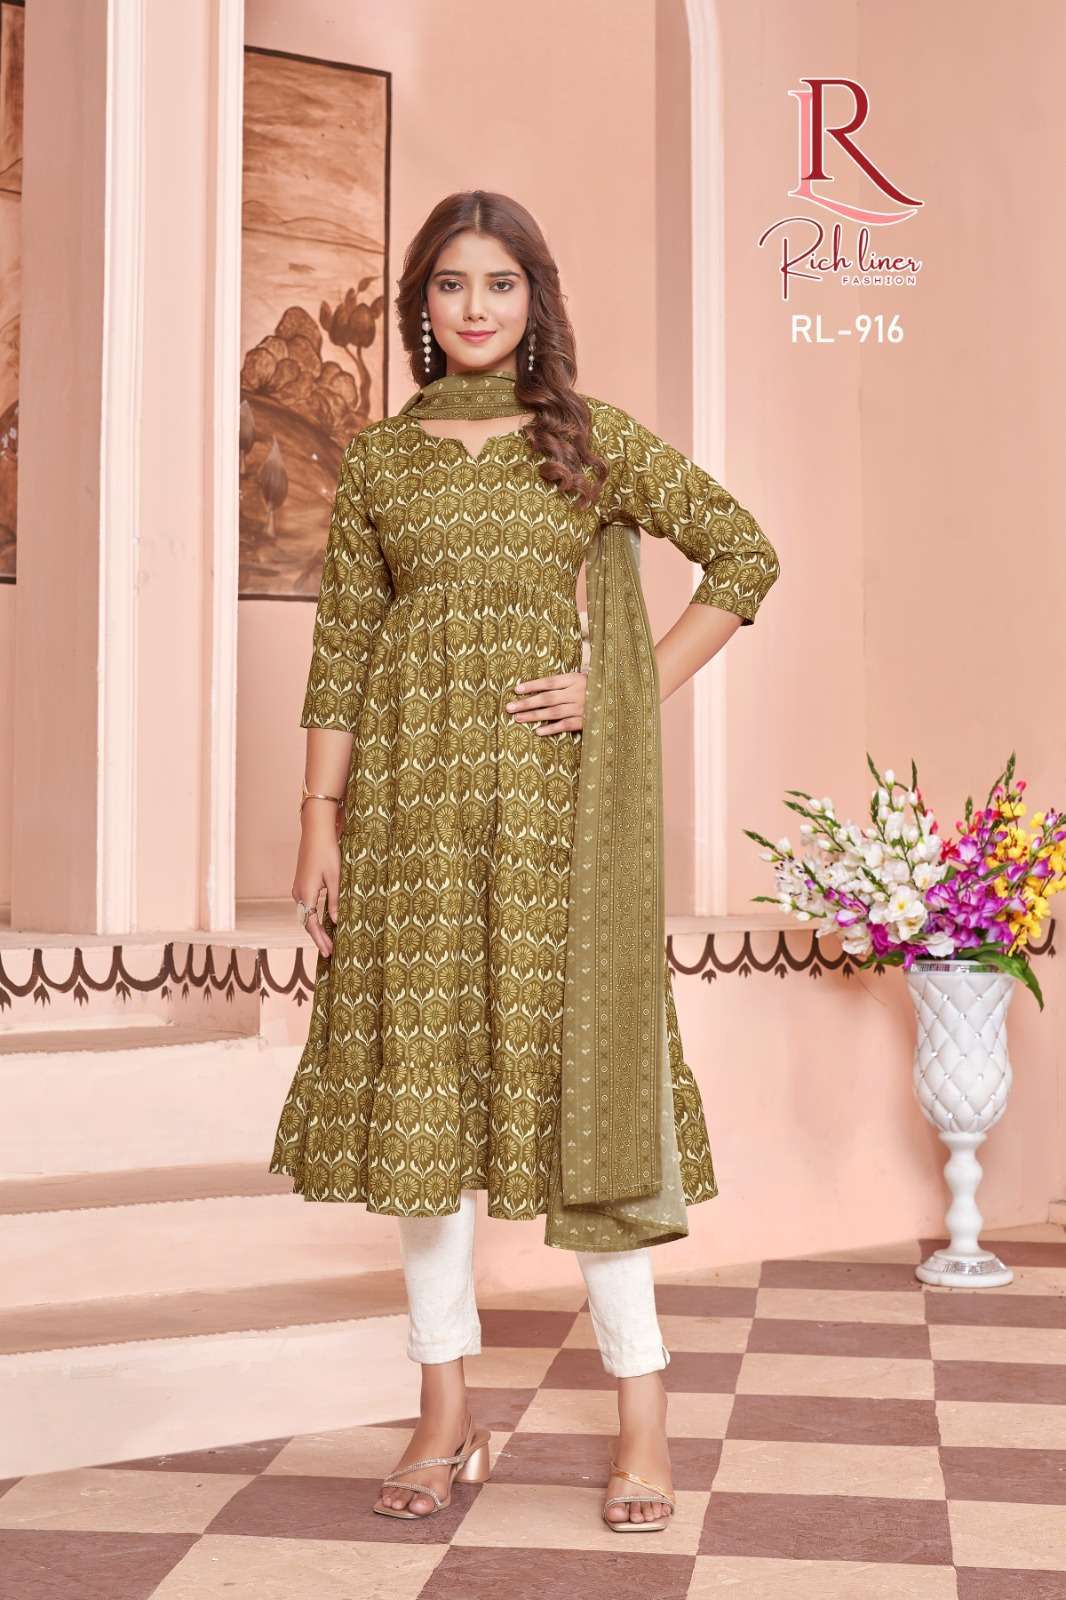 Design for Kurt | Latest Kurti designs - A perfect blend of tradition and  style | Times Now